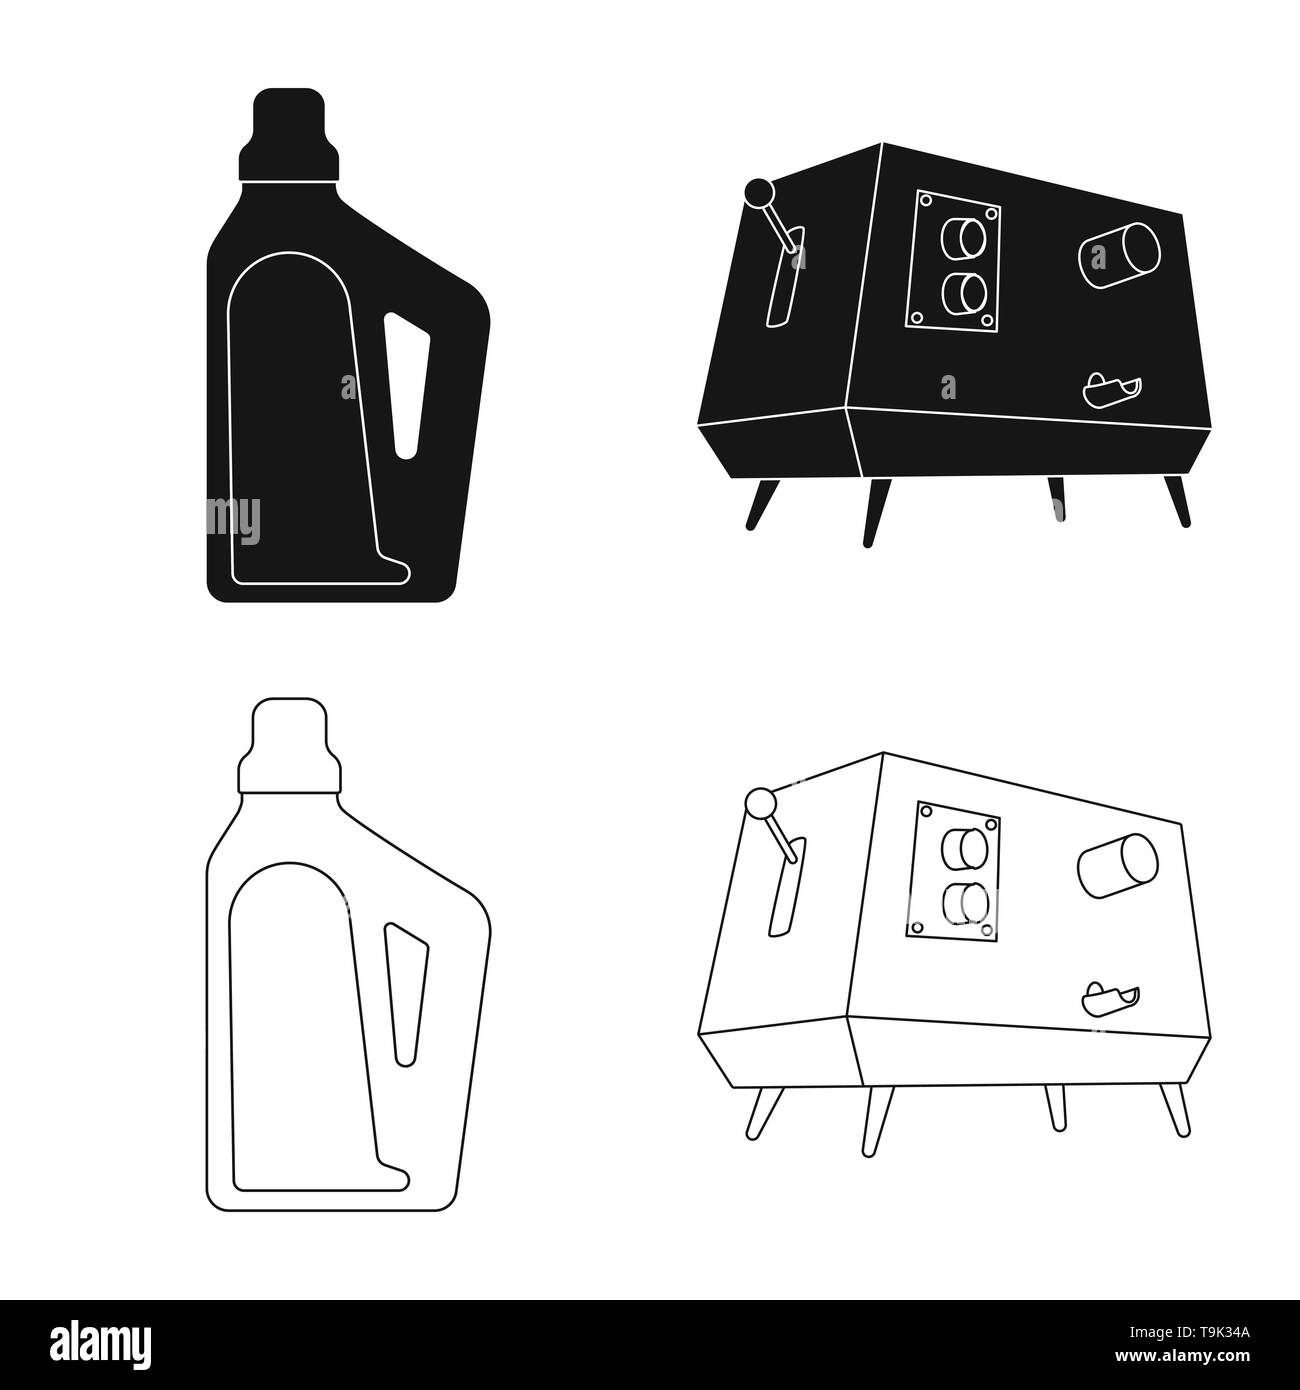 household,juicer,chemicals,machine,organic,automatic,bottle,metal,plastic,container,label,cube,capacity,apparatus,storage,drink,fruit,packaging,equipment,farm,agriculture,sucrose,technology,sugarcane,cane,sugar,field,plant,plantation,set,vector,icon,illustration,isolated,collection,design,element,graphic,sign Vector Vectors , Stock Vector